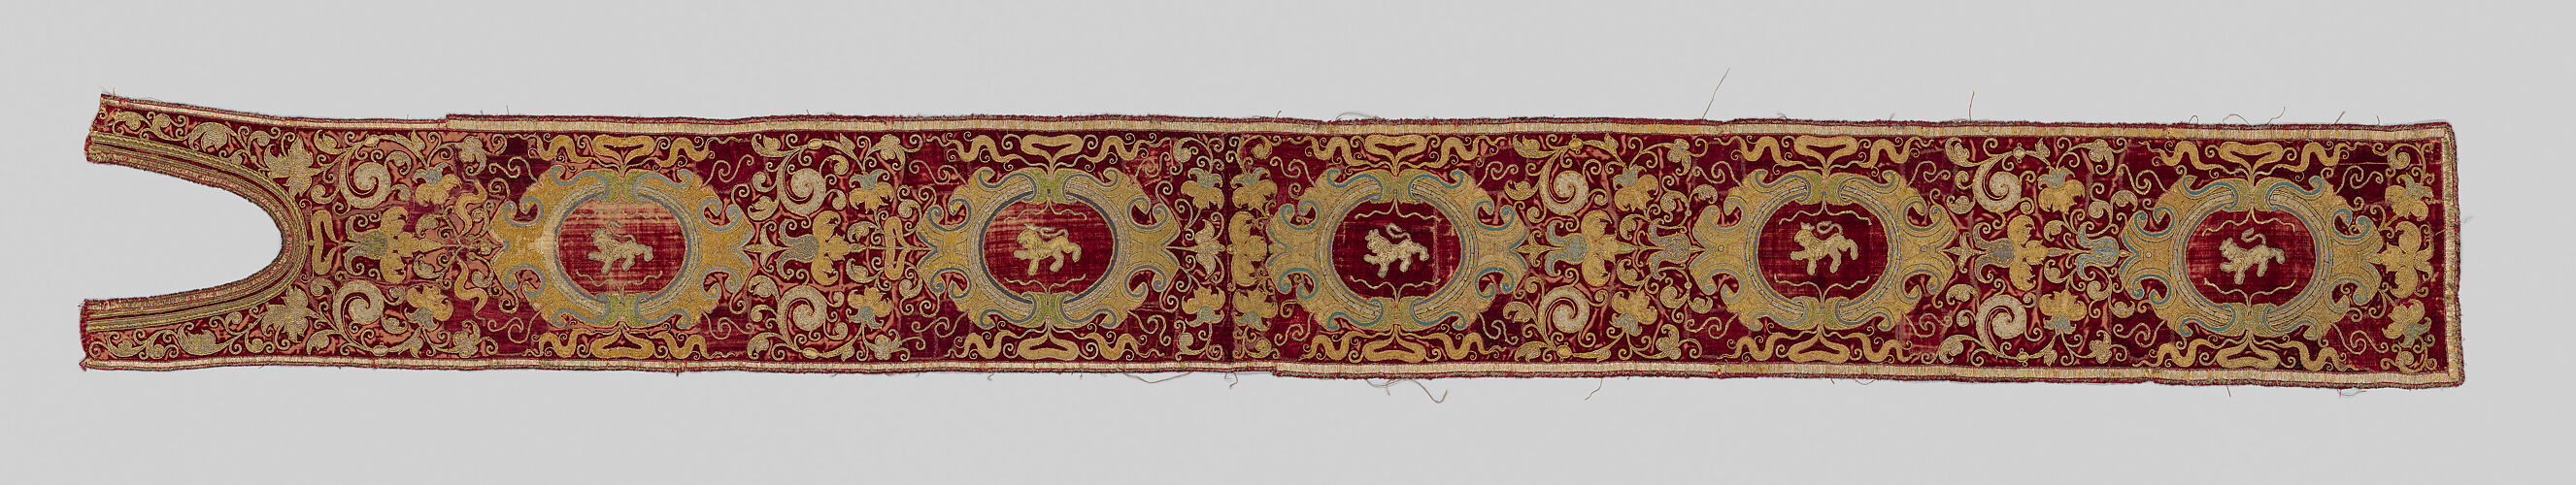 Two Orphrey Sections made into a Hanging or Cover